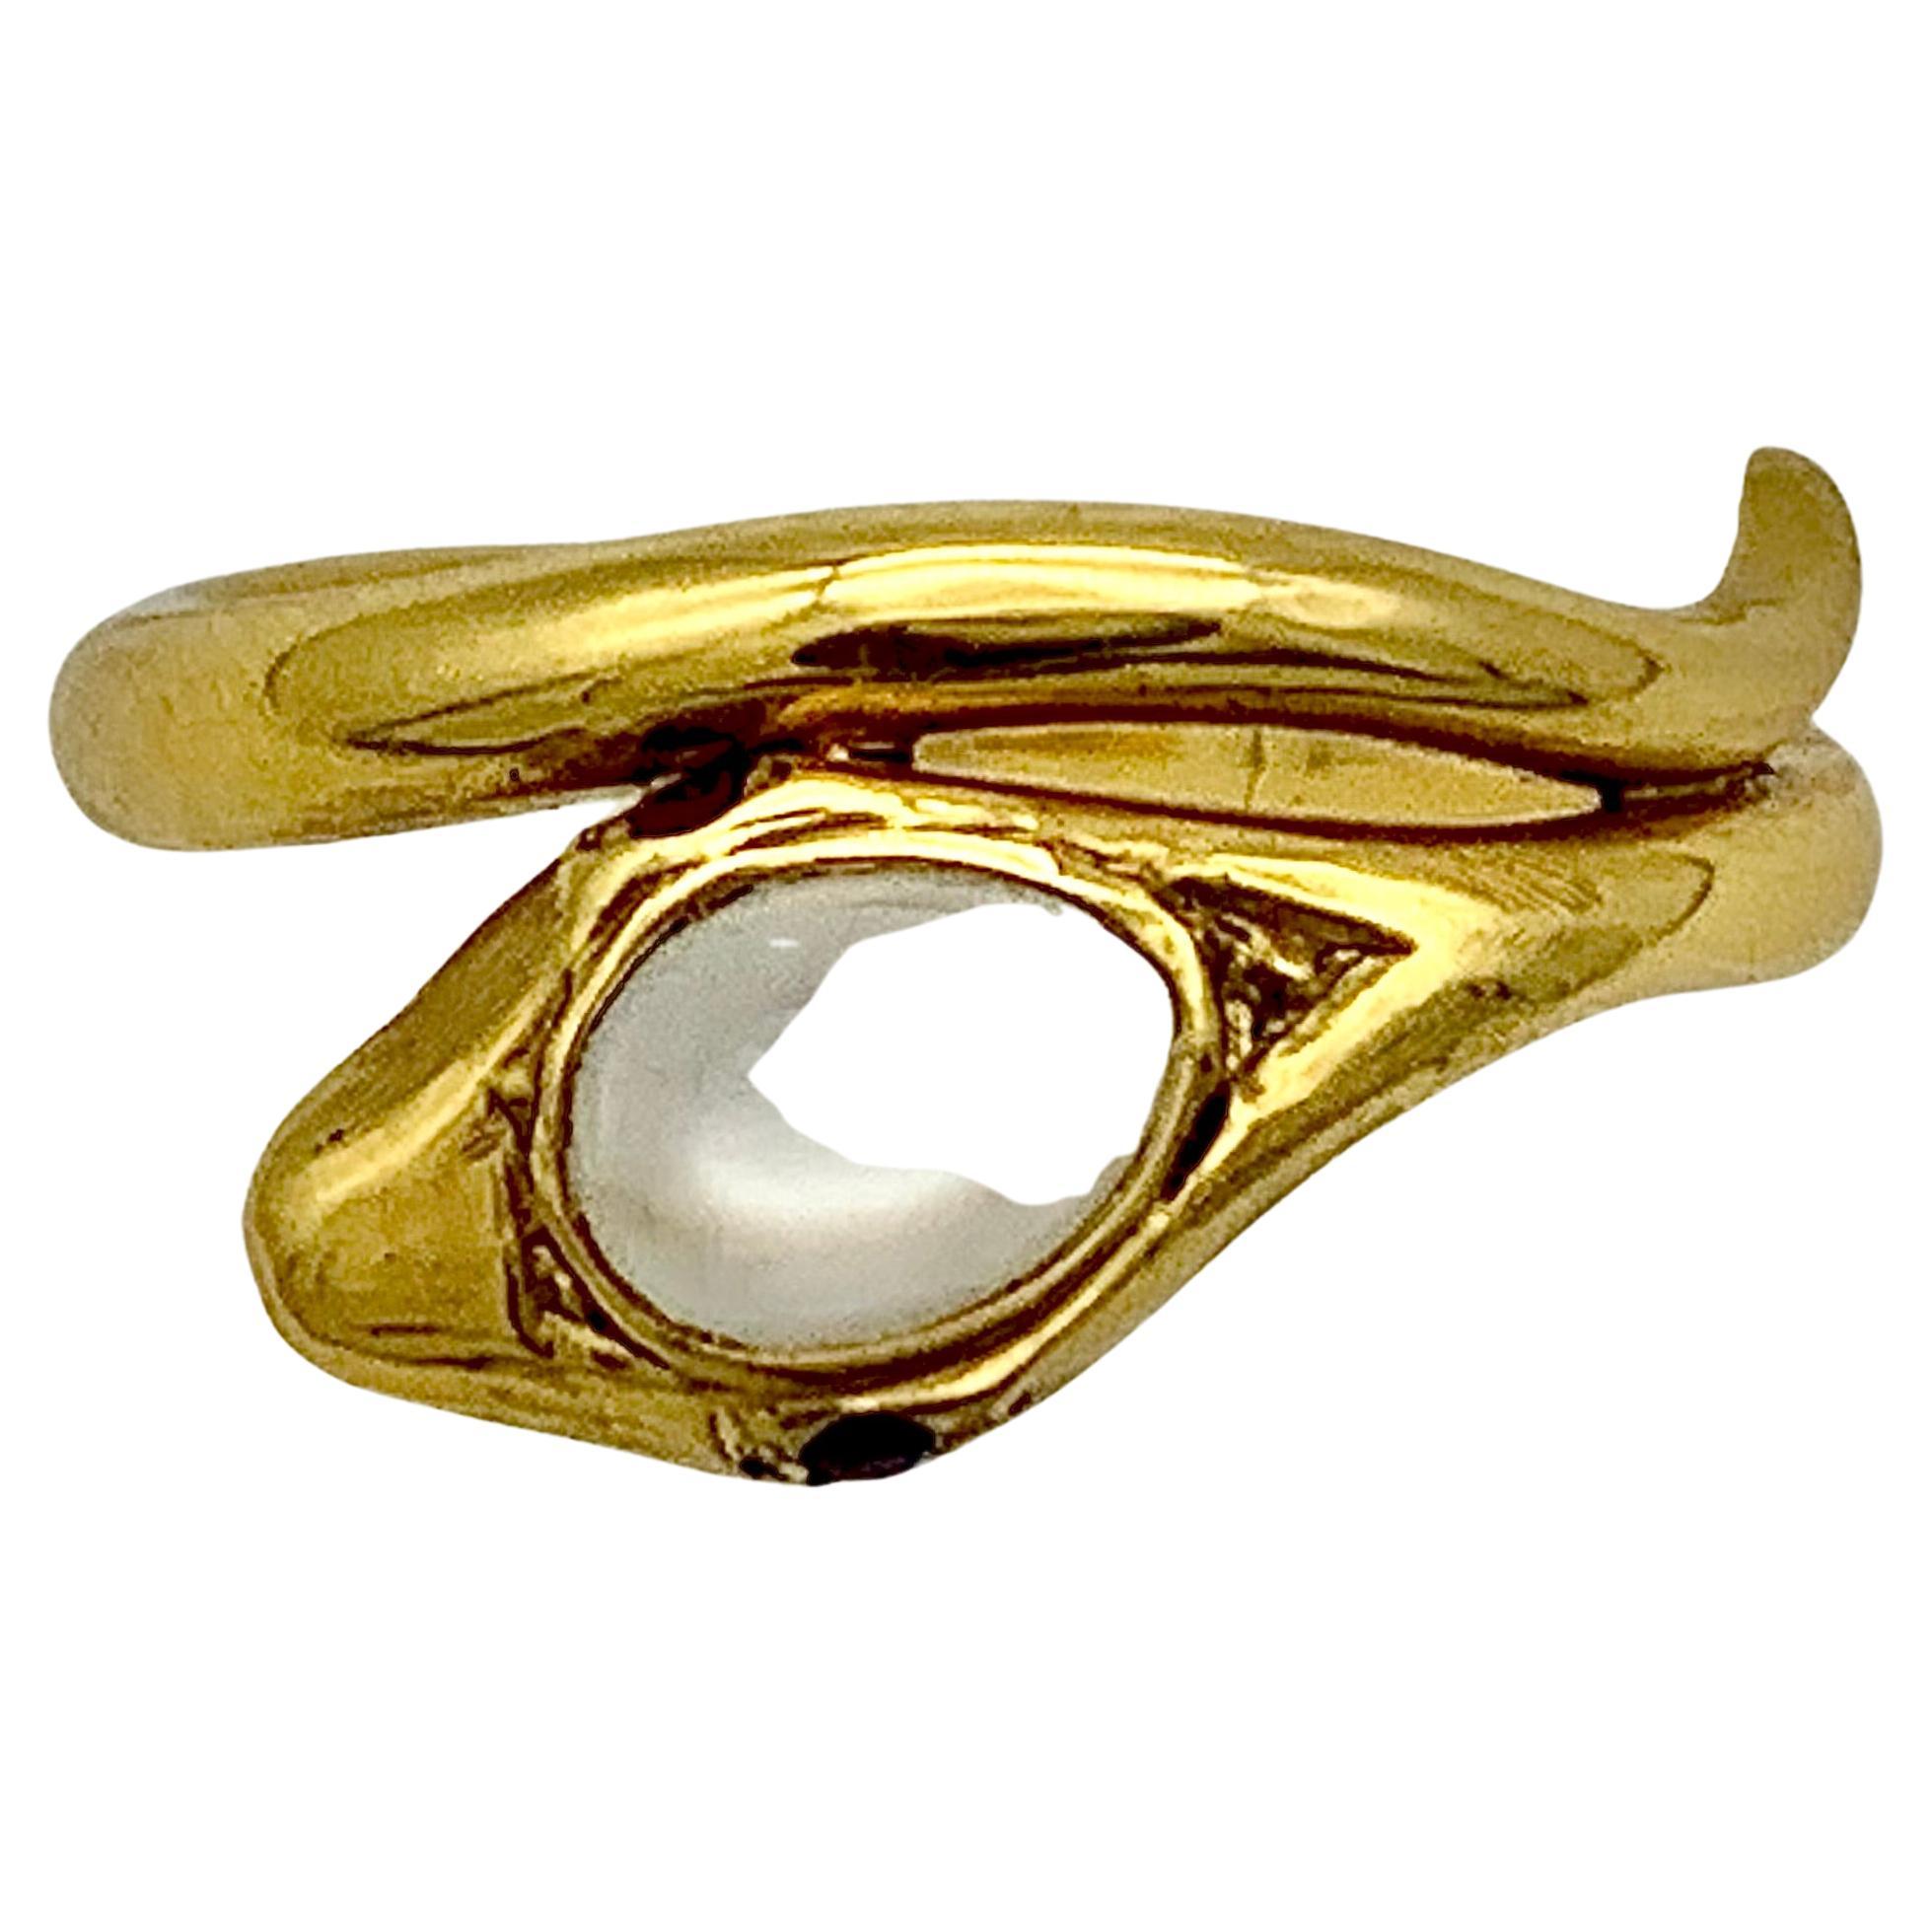 The snake ring as a symbol fo eternity was a popular piece of  jewellery. Jewellery with sentimental messages was intensely popular in a period where sentiments had often to be transmitted in secret way. The design of snake rings underwent  many